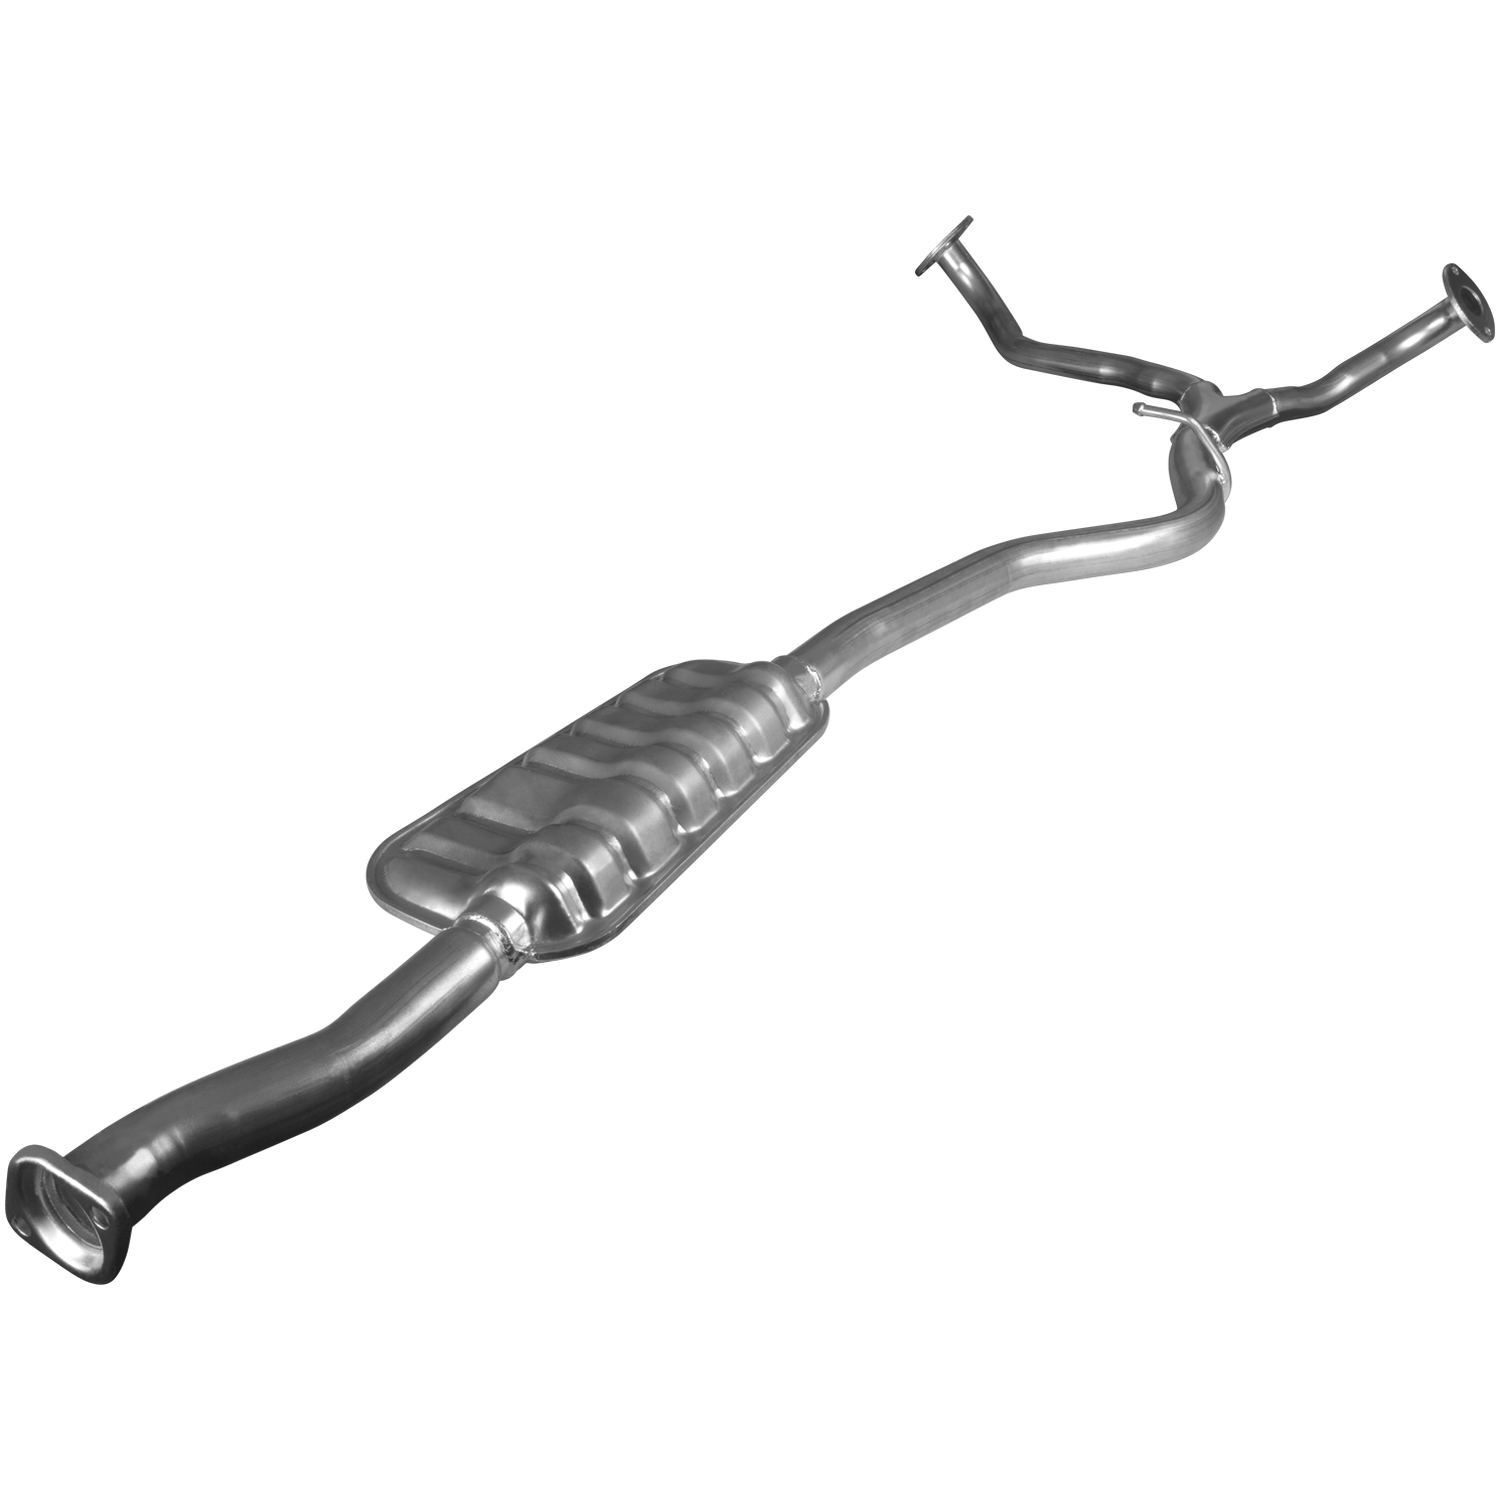 Direct-Fit Exhaust Resonator, 2005-2009 Subaru Legacy/Outback 2.5L